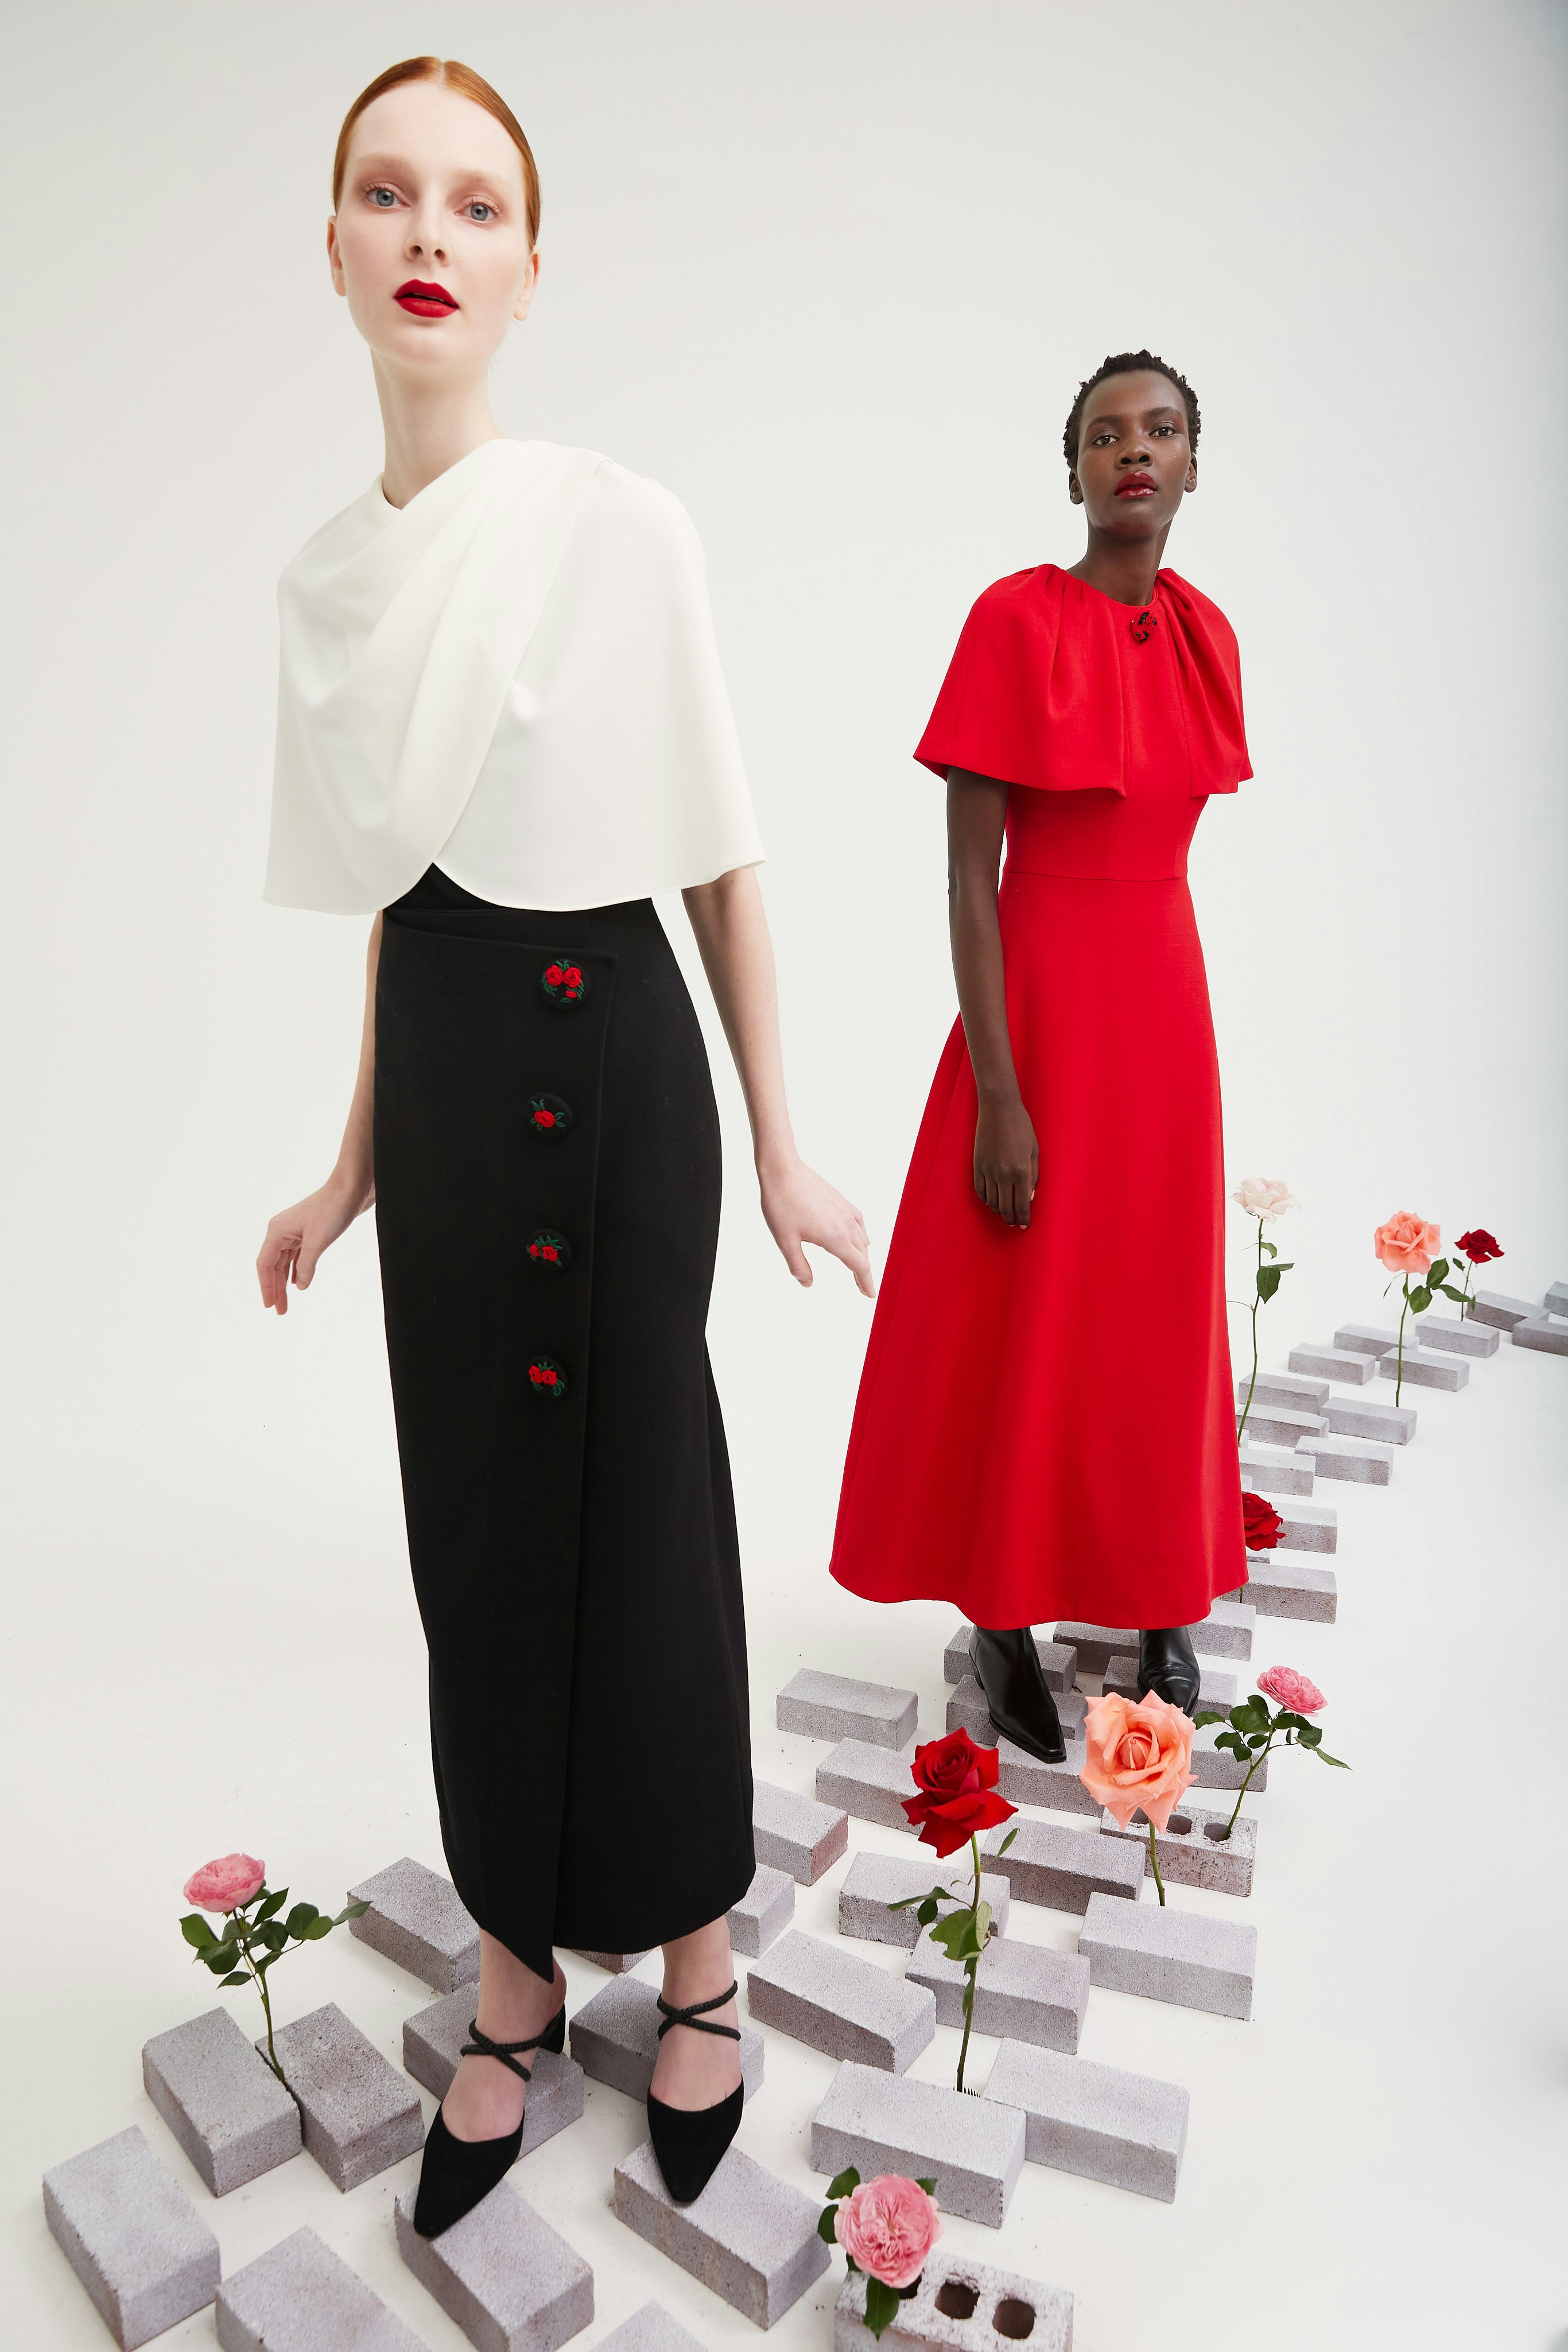 Lela Rose Spring 2021 Ready-to-Wear Collection